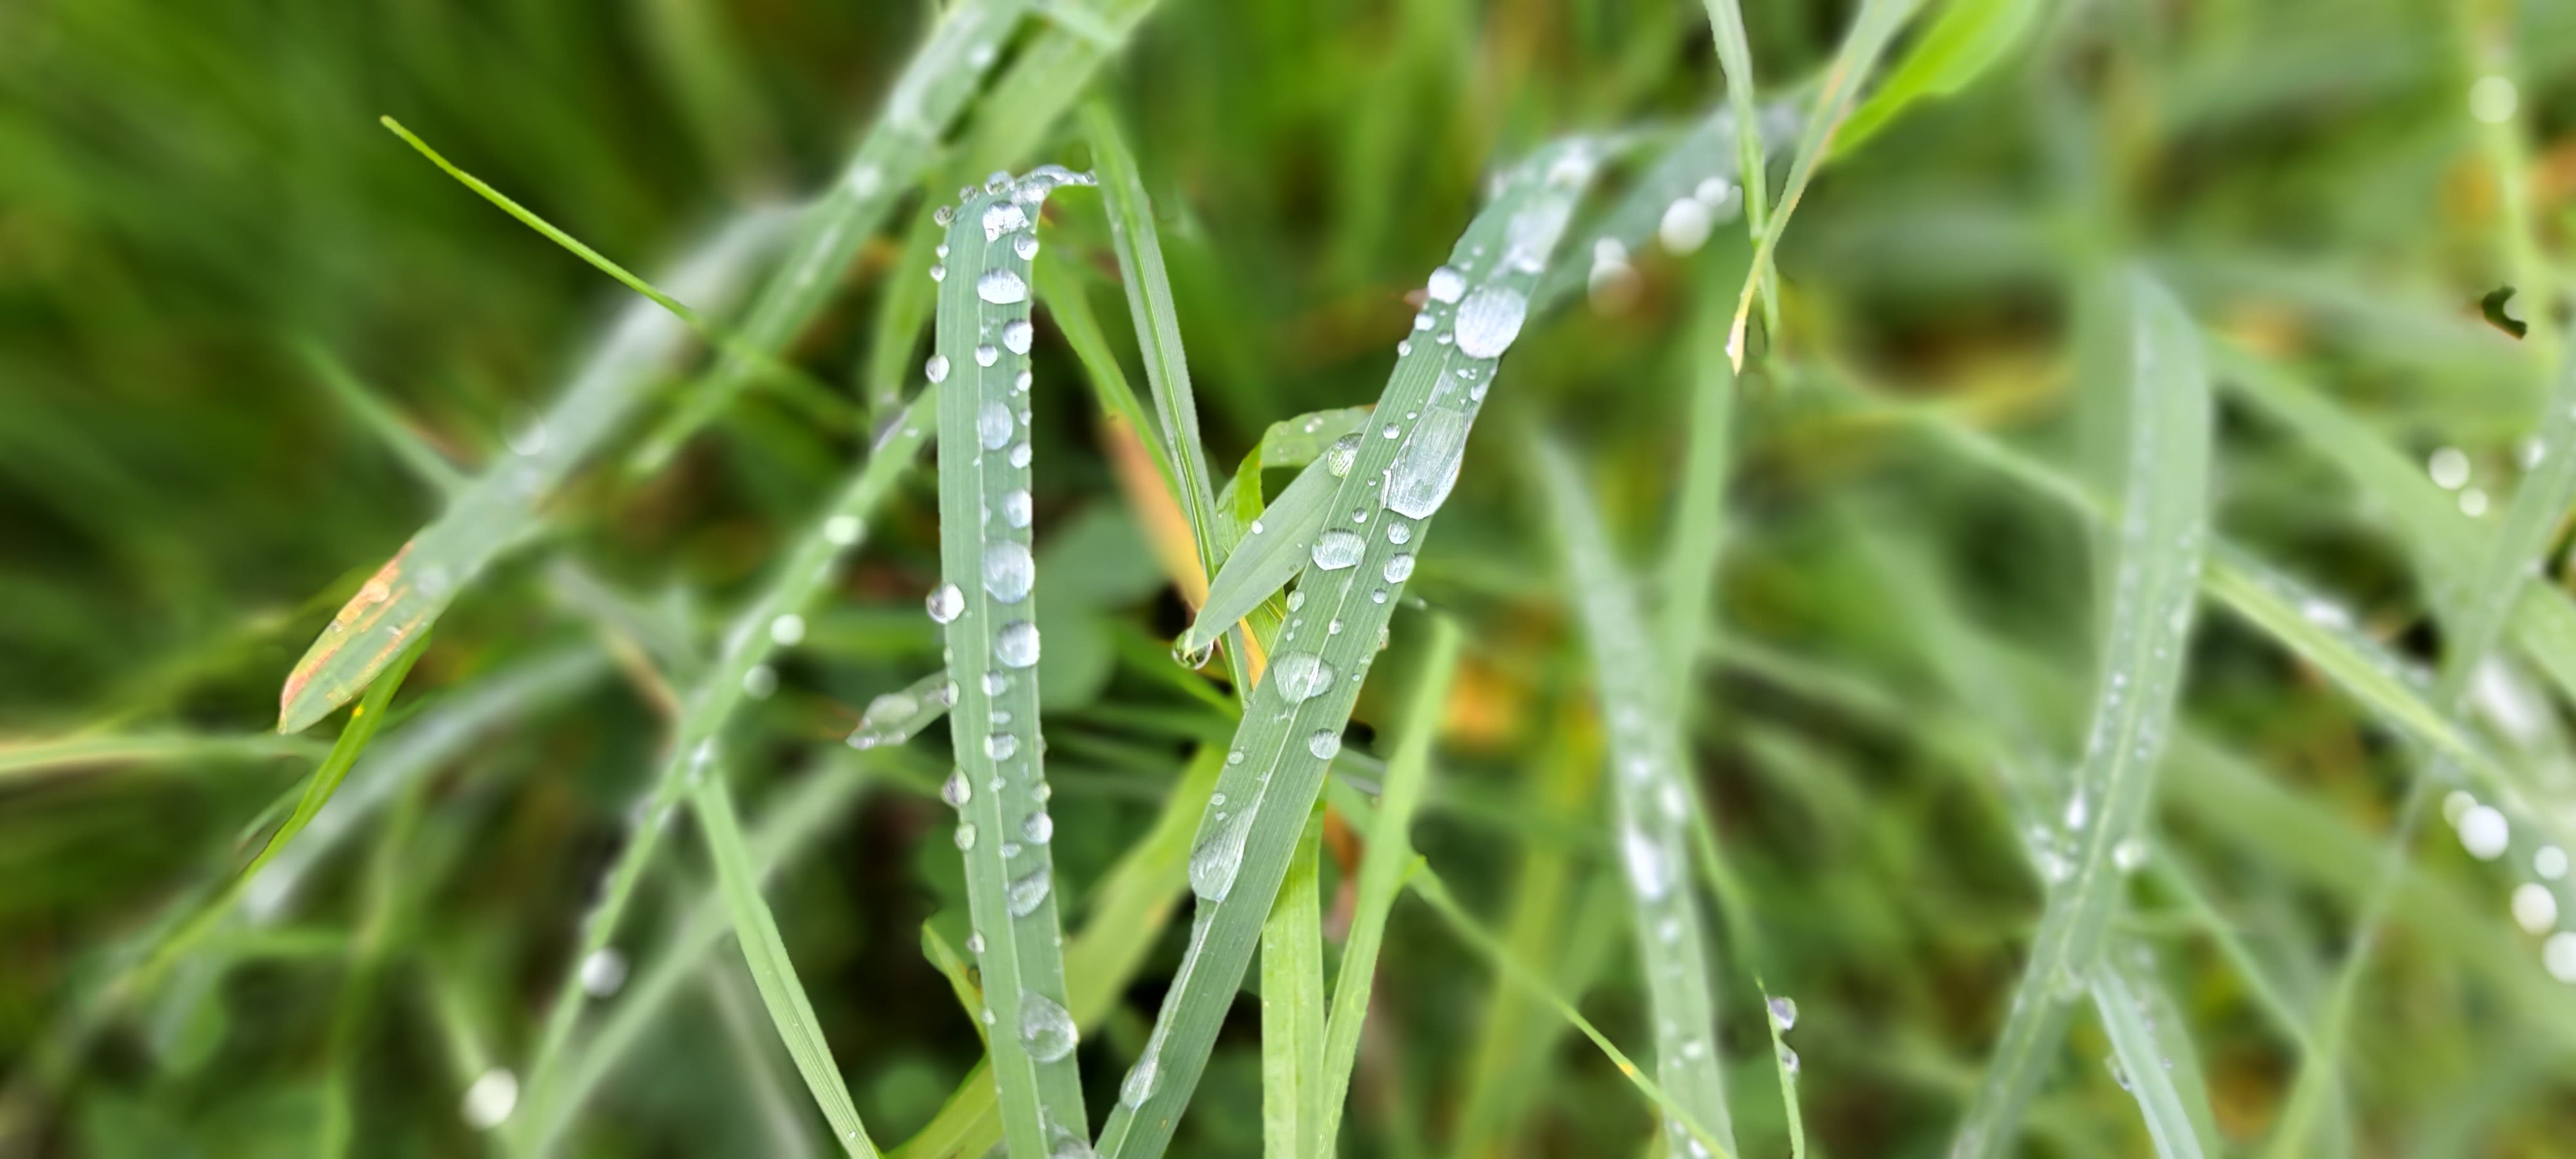 Close up image focussing on droplets of water weighing down blades of green grass with background blurred out, the image is full of different shades of green and the raindrops look like beads of glass.